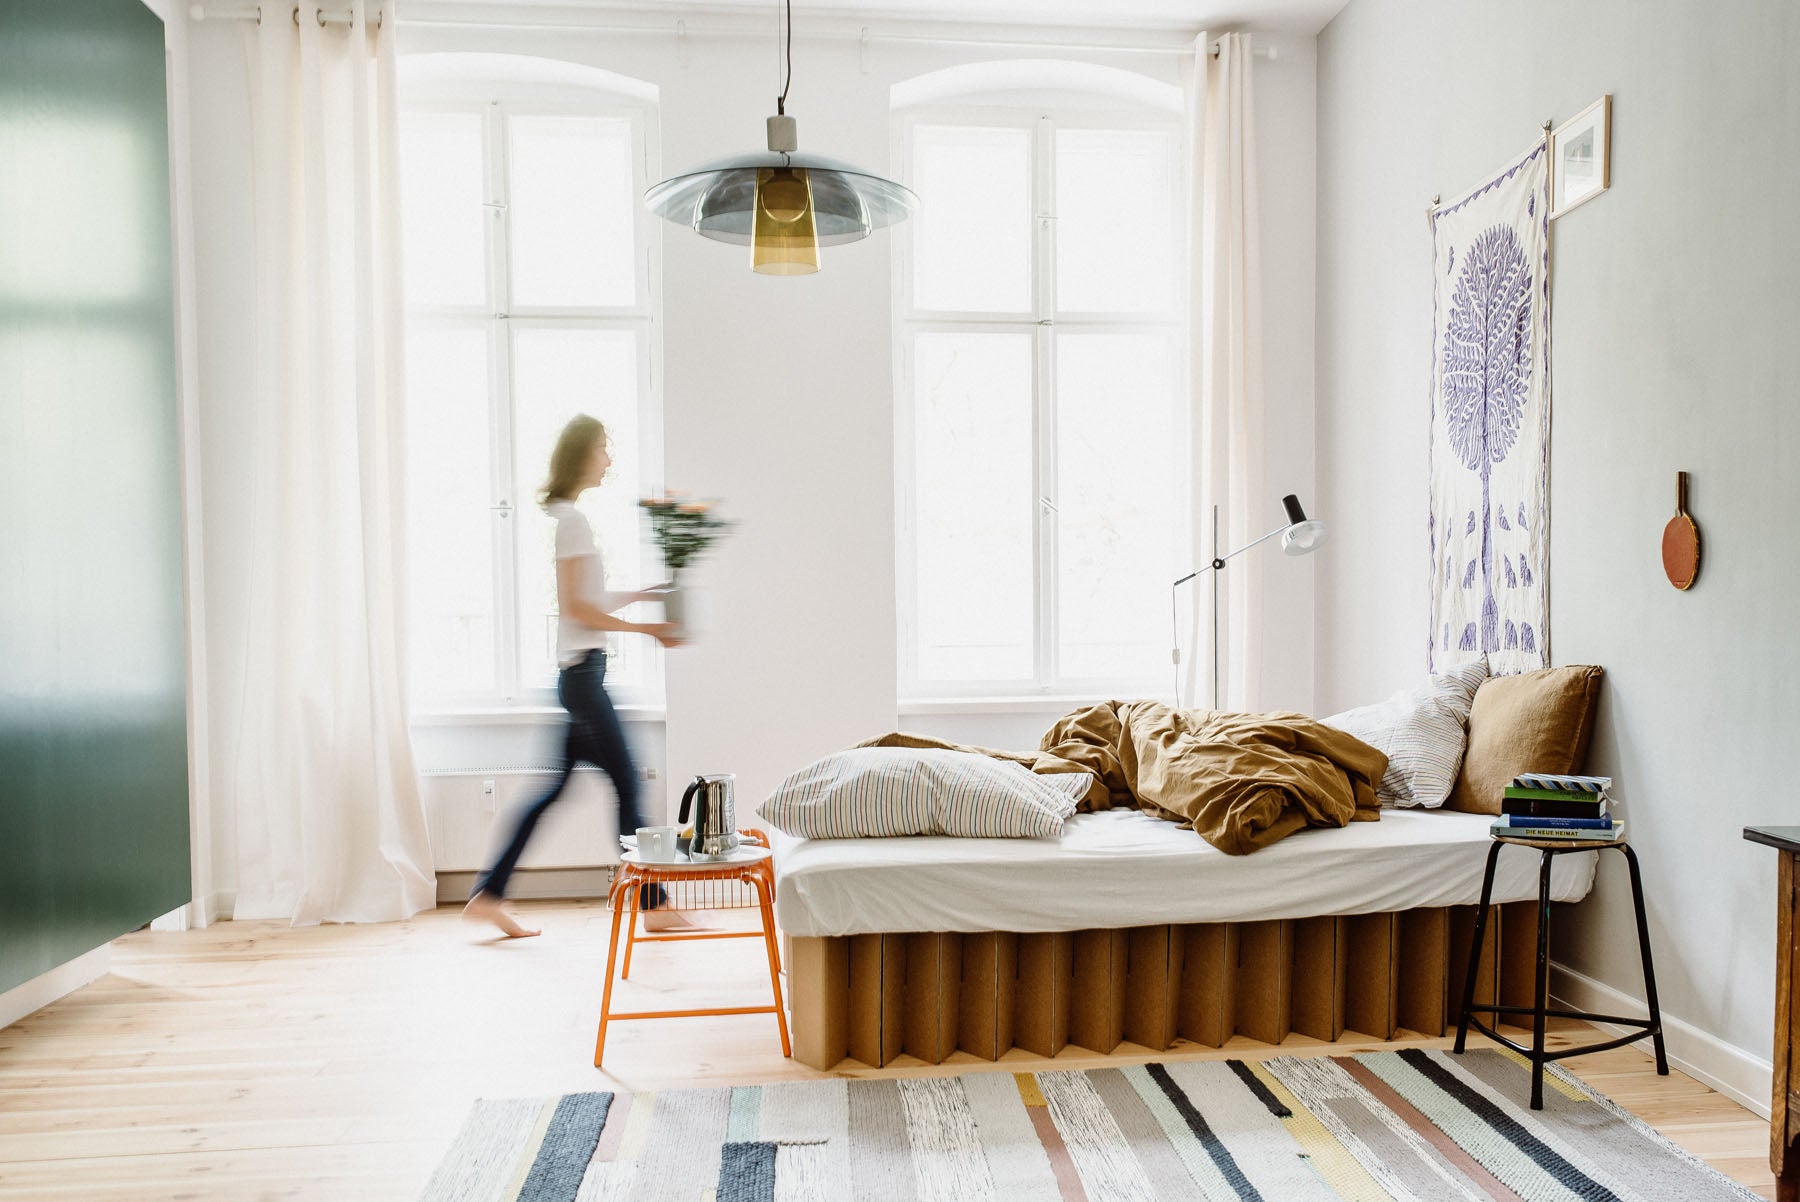 Bett 2.0, a 100% recyclable bed frame by RIAB USA, accented by blurred image background and multi-color rug